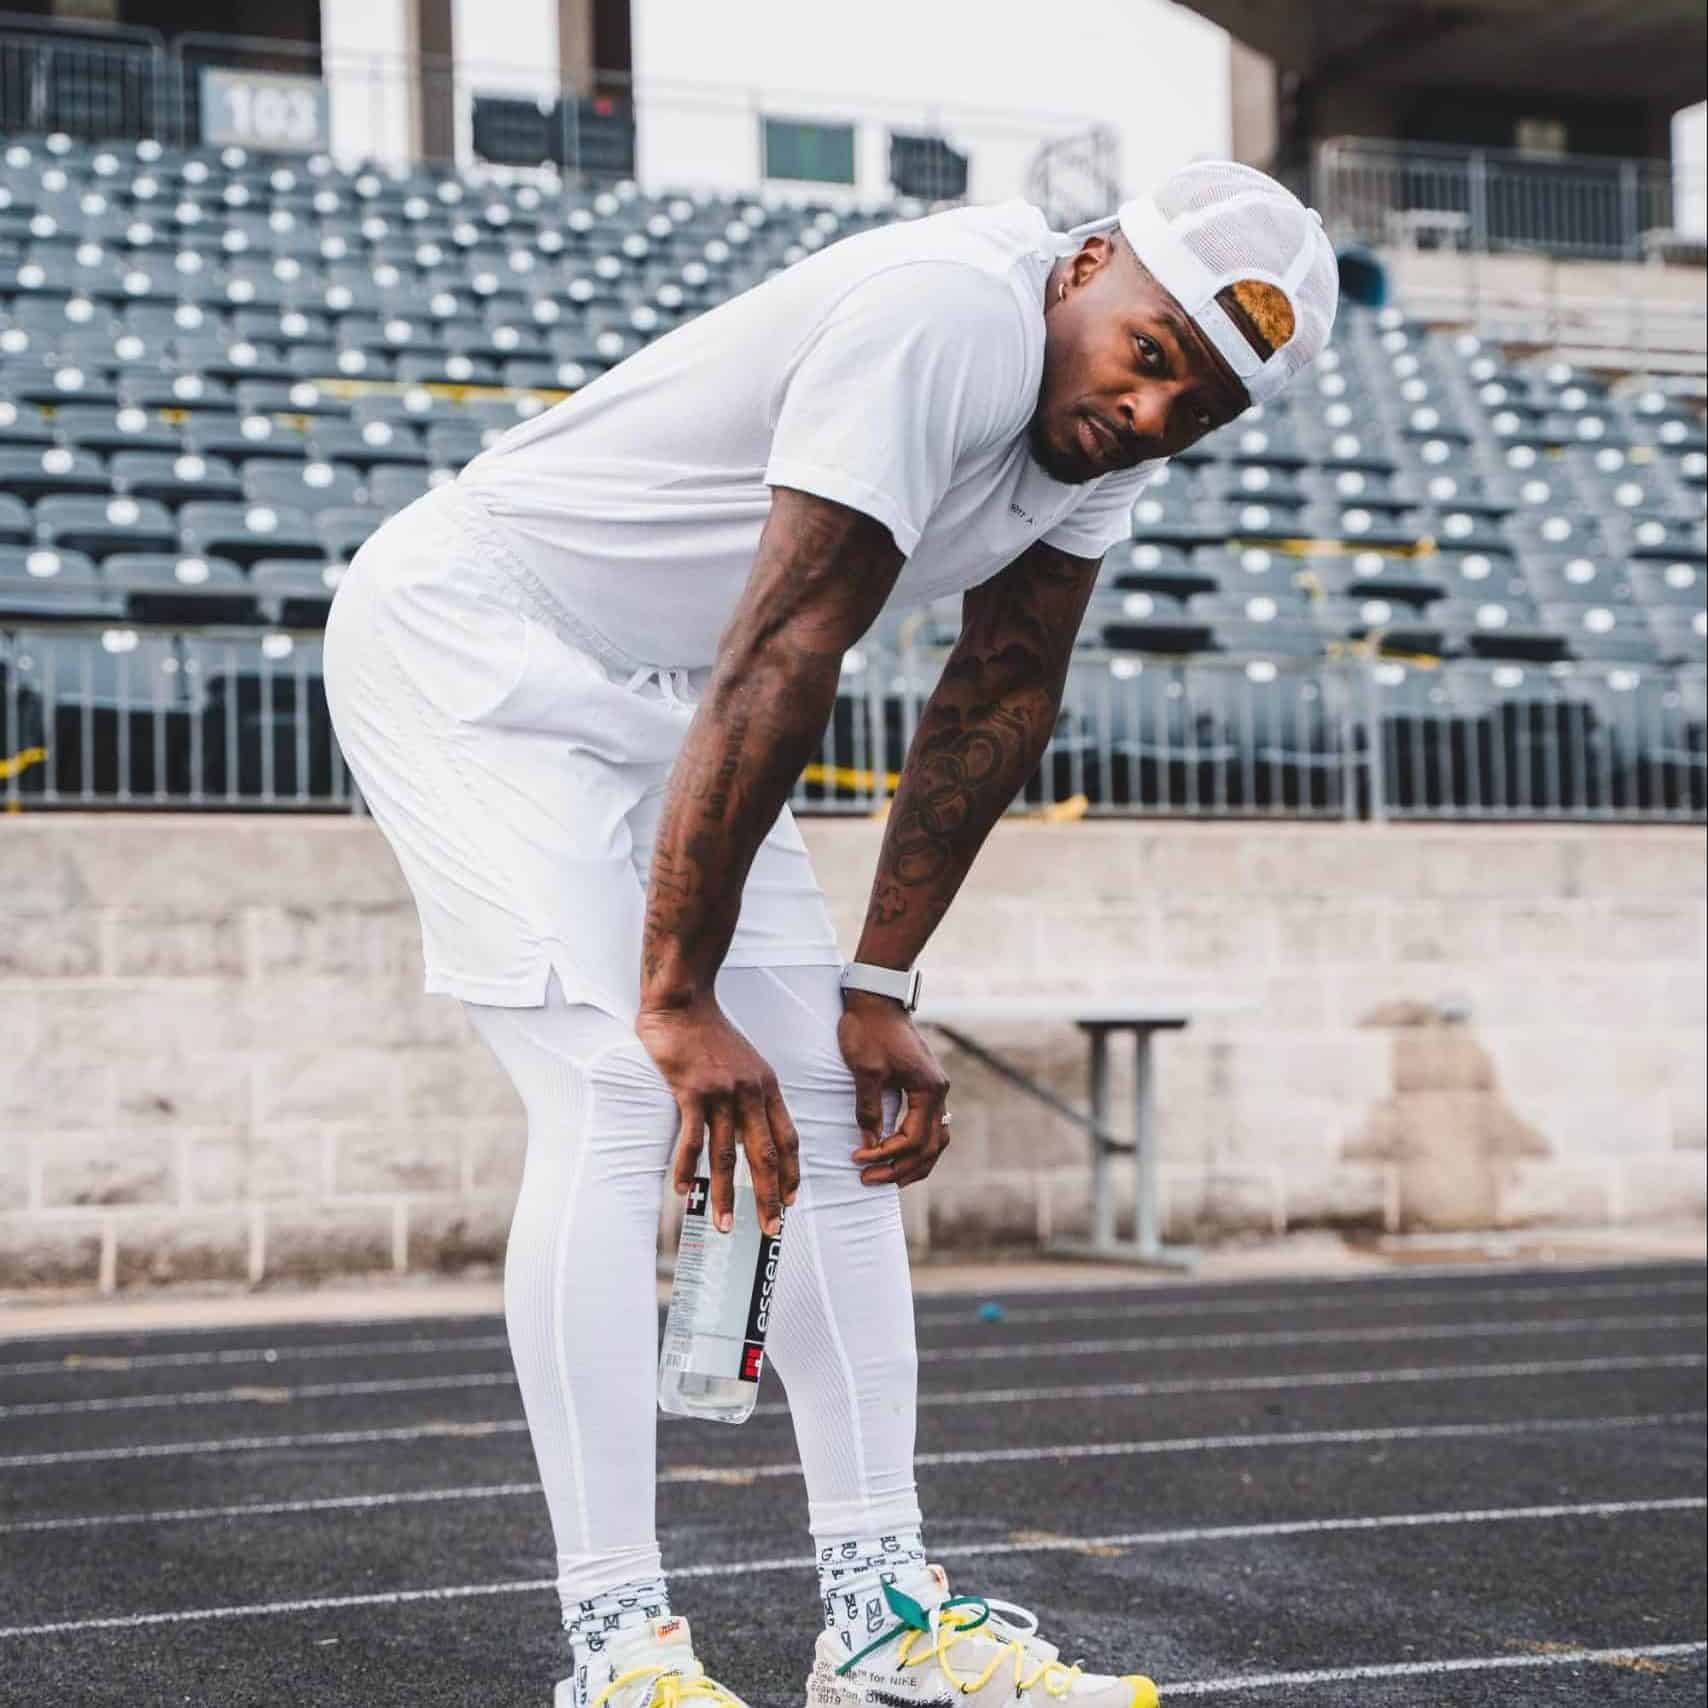 Olympic track athlete and professional wide receiver